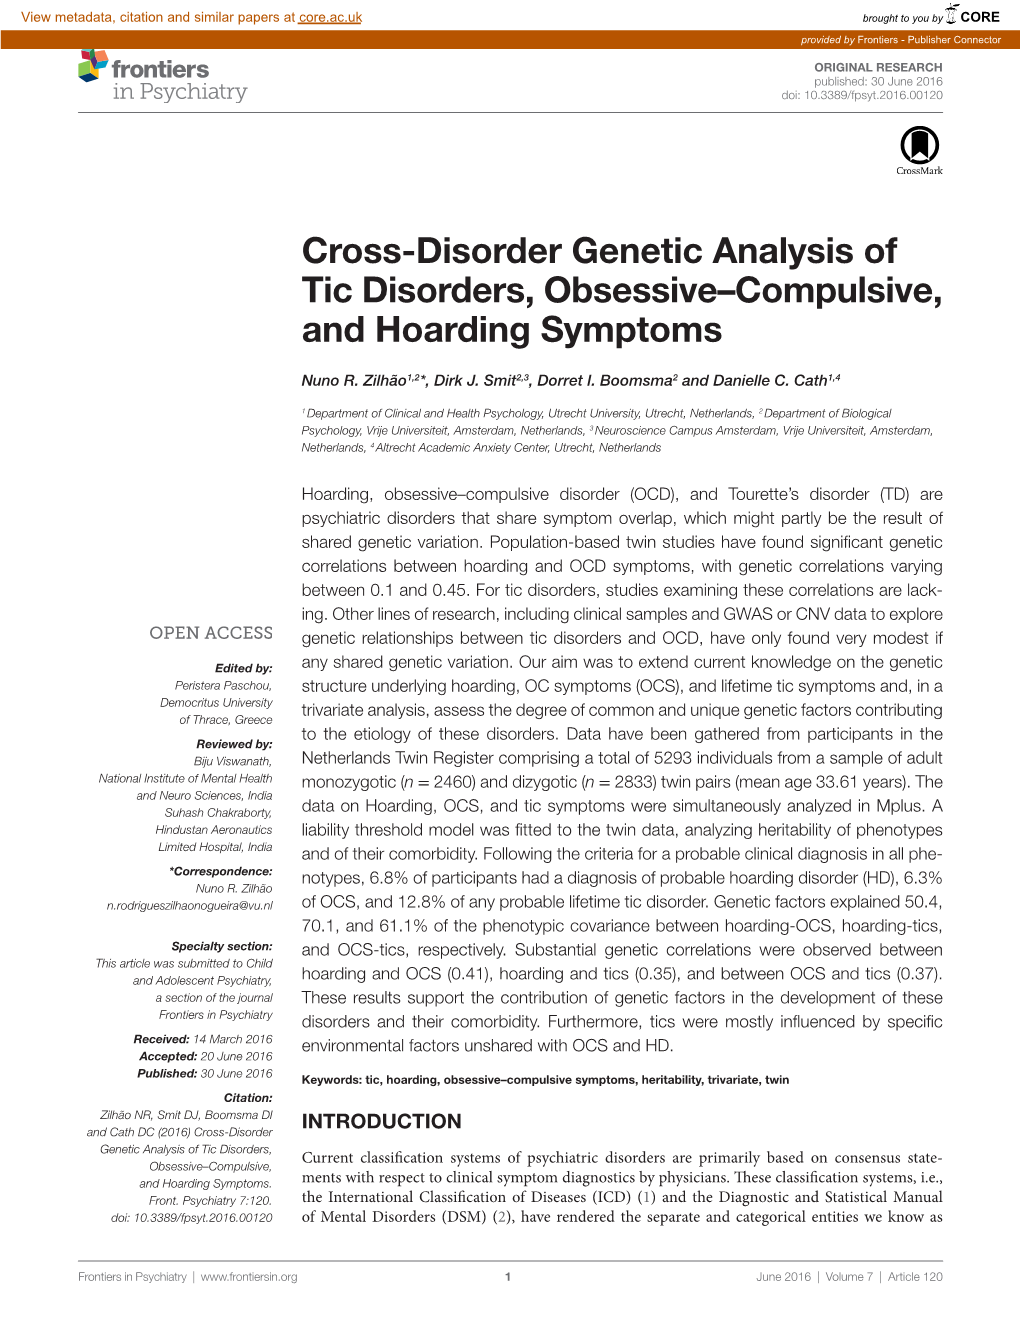 Cross-Disorder Genetic Analysis of Tic Disorders, Obsessive–Compulsive, and Hoarding Symptoms